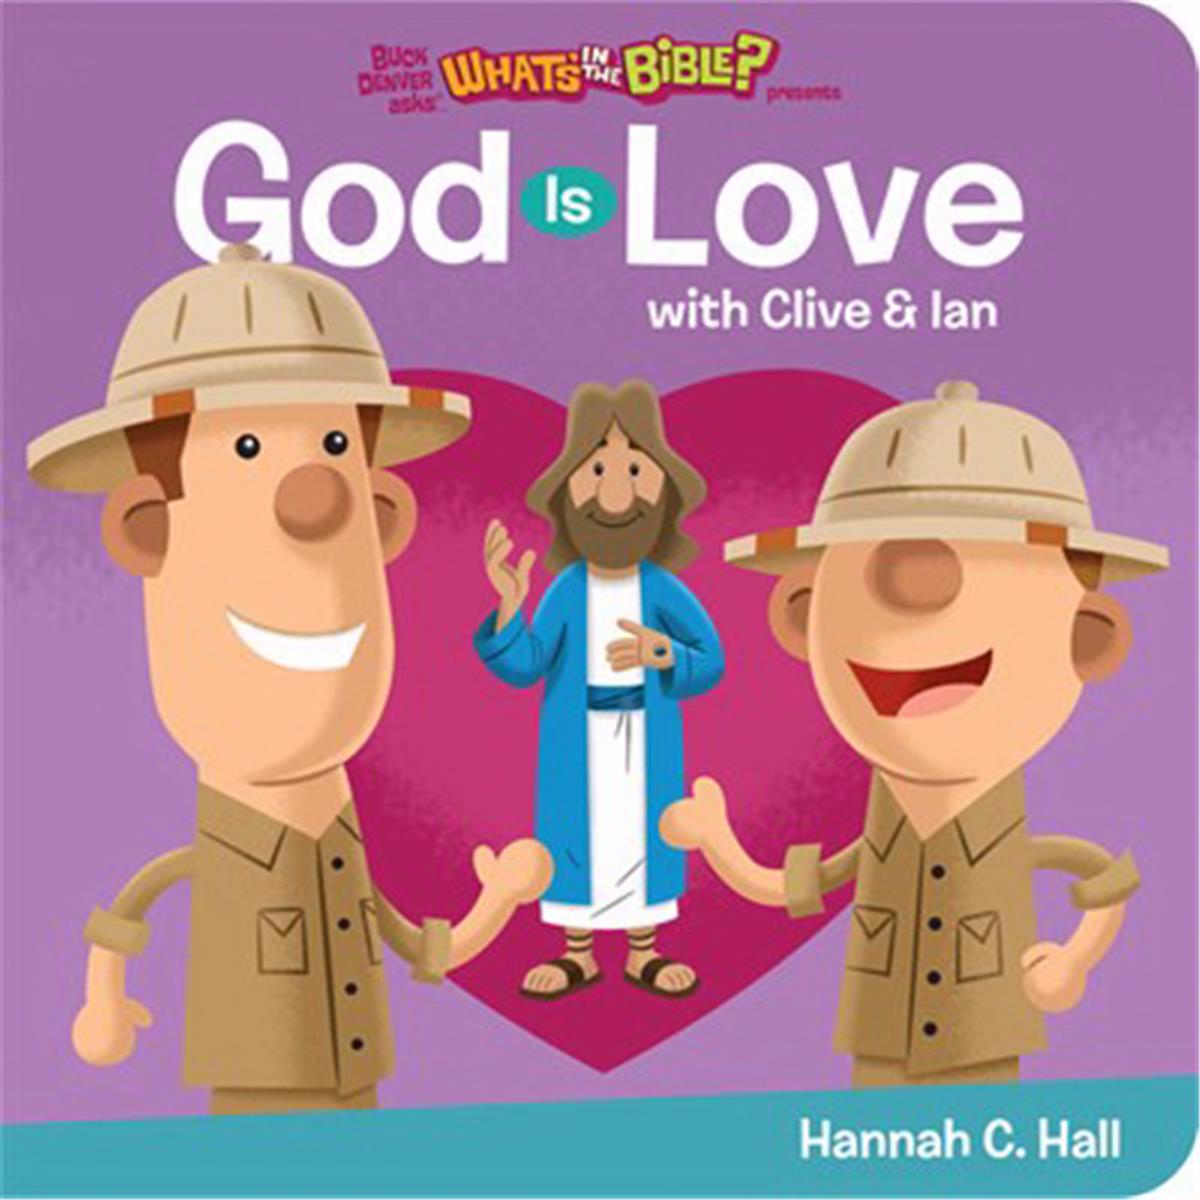 Jellytelly Press 147869 God Is Love - Buck Denver Asks Whats In The Bible